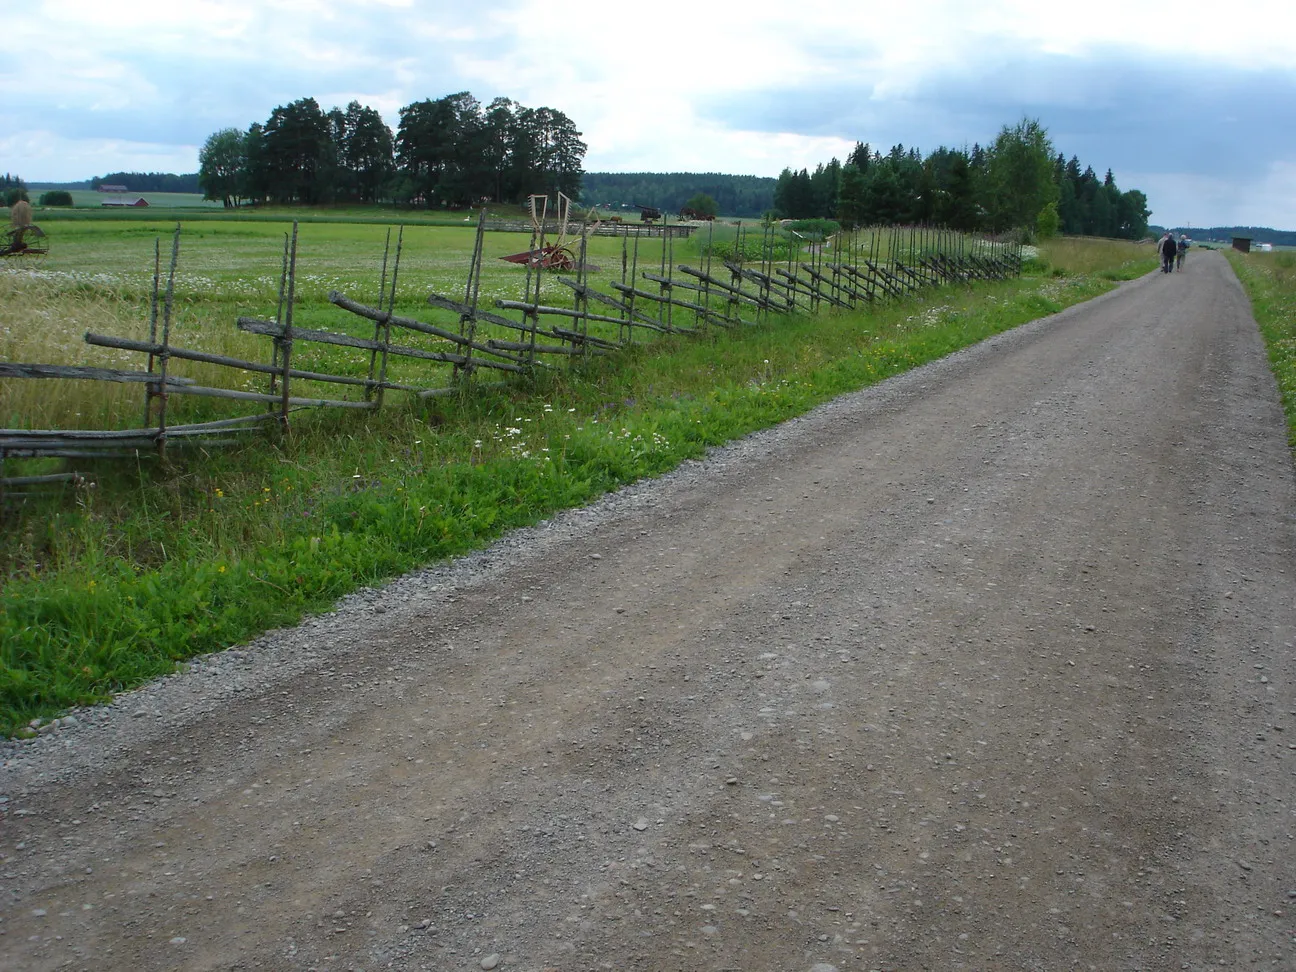 Photo showing: A view from Elonkierto – The Agricultural Exhibition Park of MTT Agrifood Research Finland in Jokioinen Manor in Jokioinen, Finland.